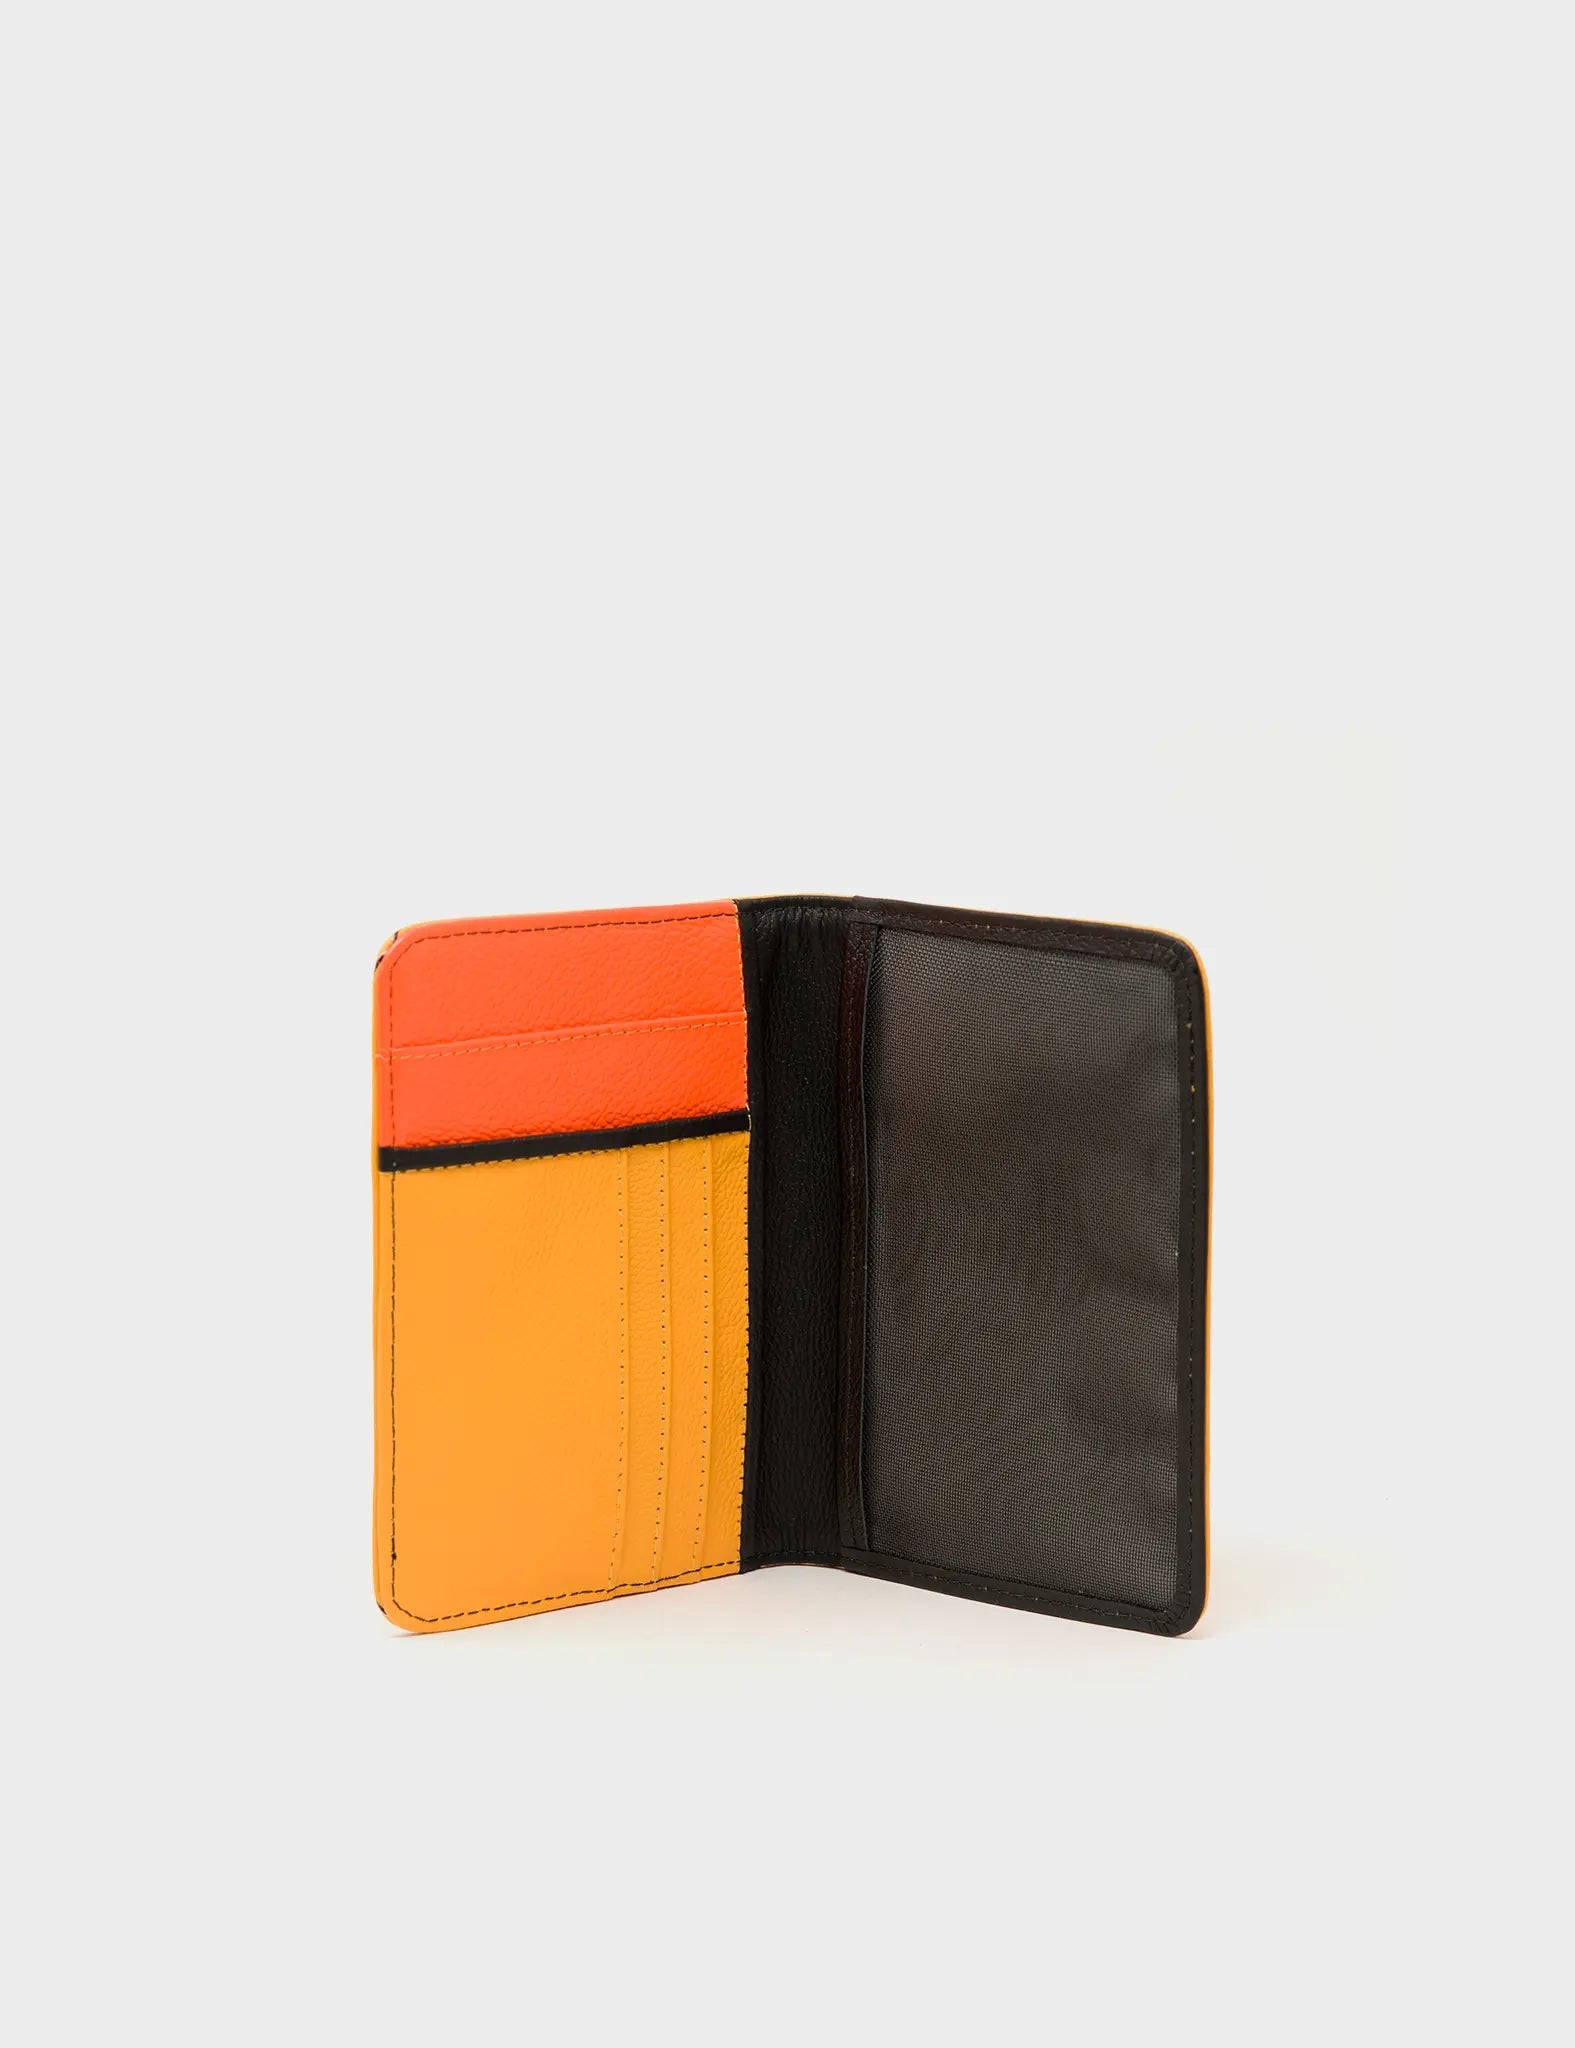 Frida Passport Cover - Marigold Leather - Inside view